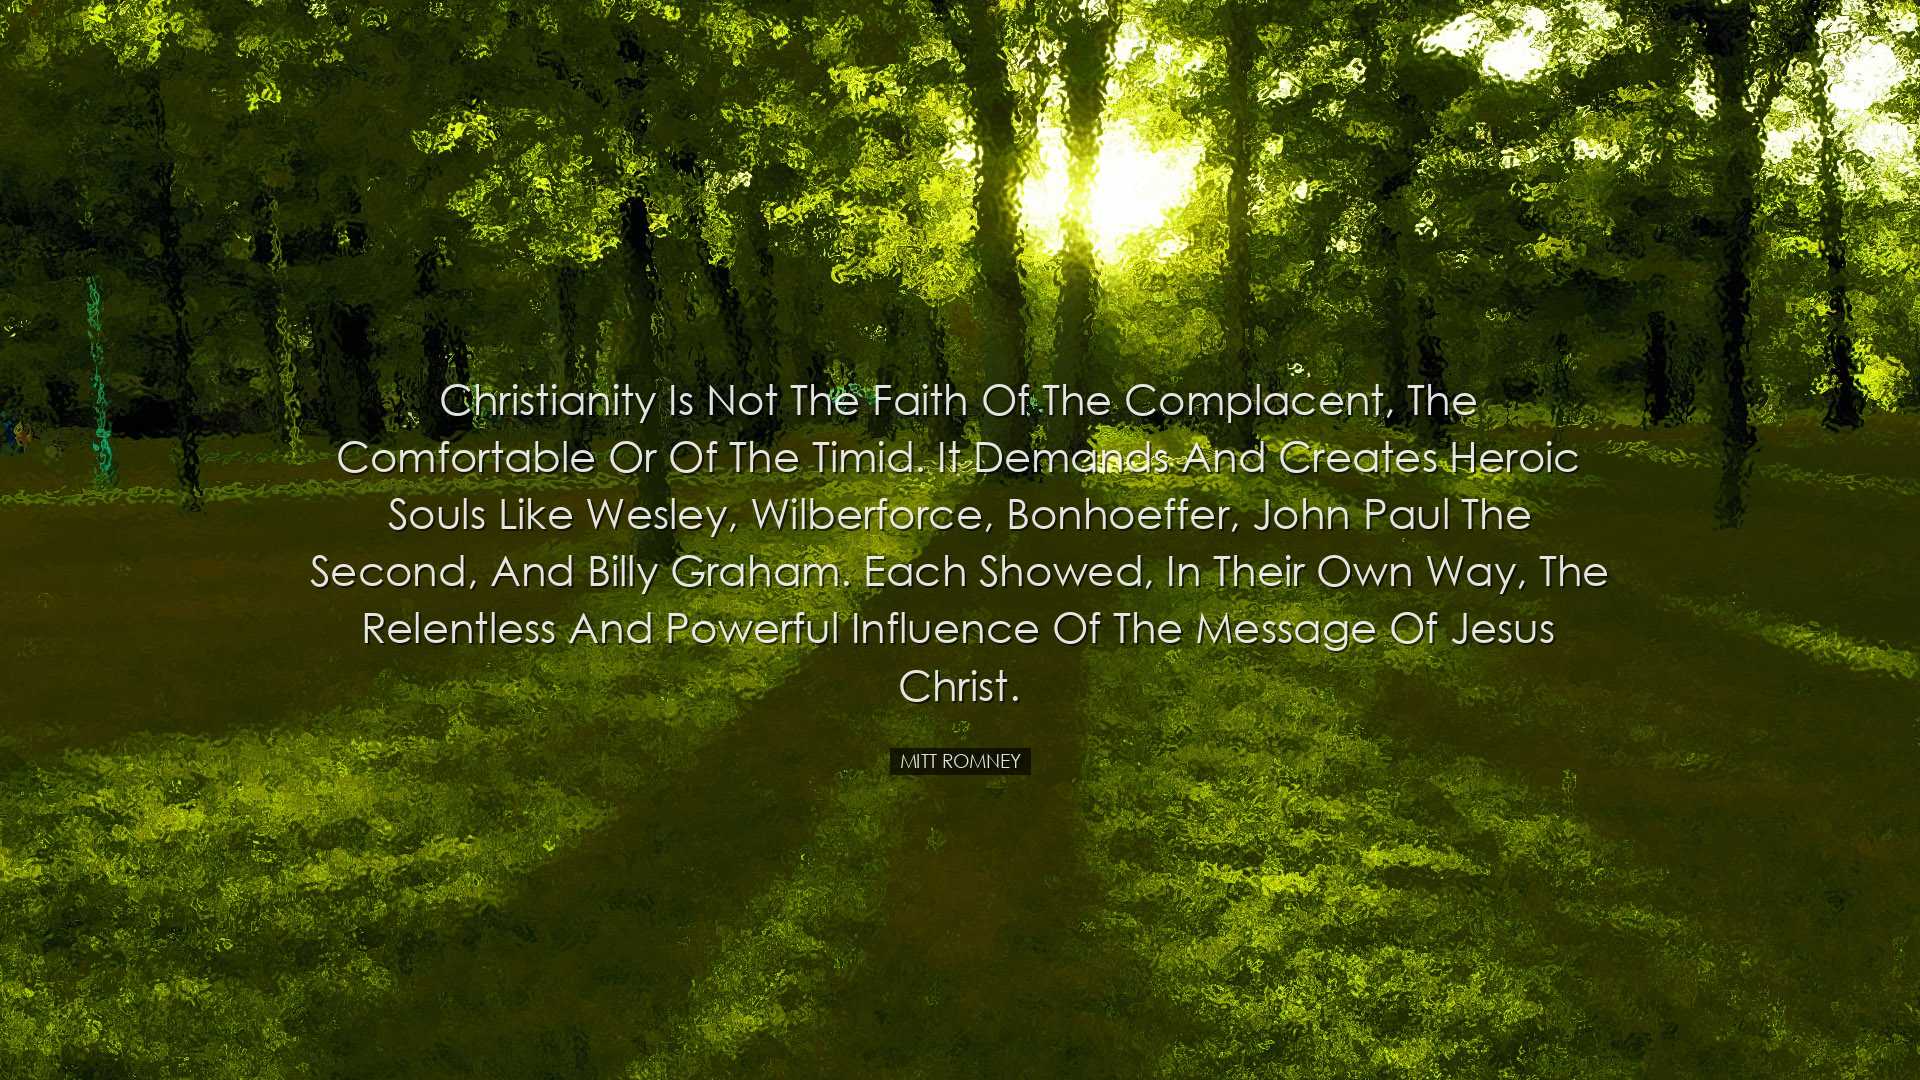 Christianity is not the faith of the complacent, the comfortable o